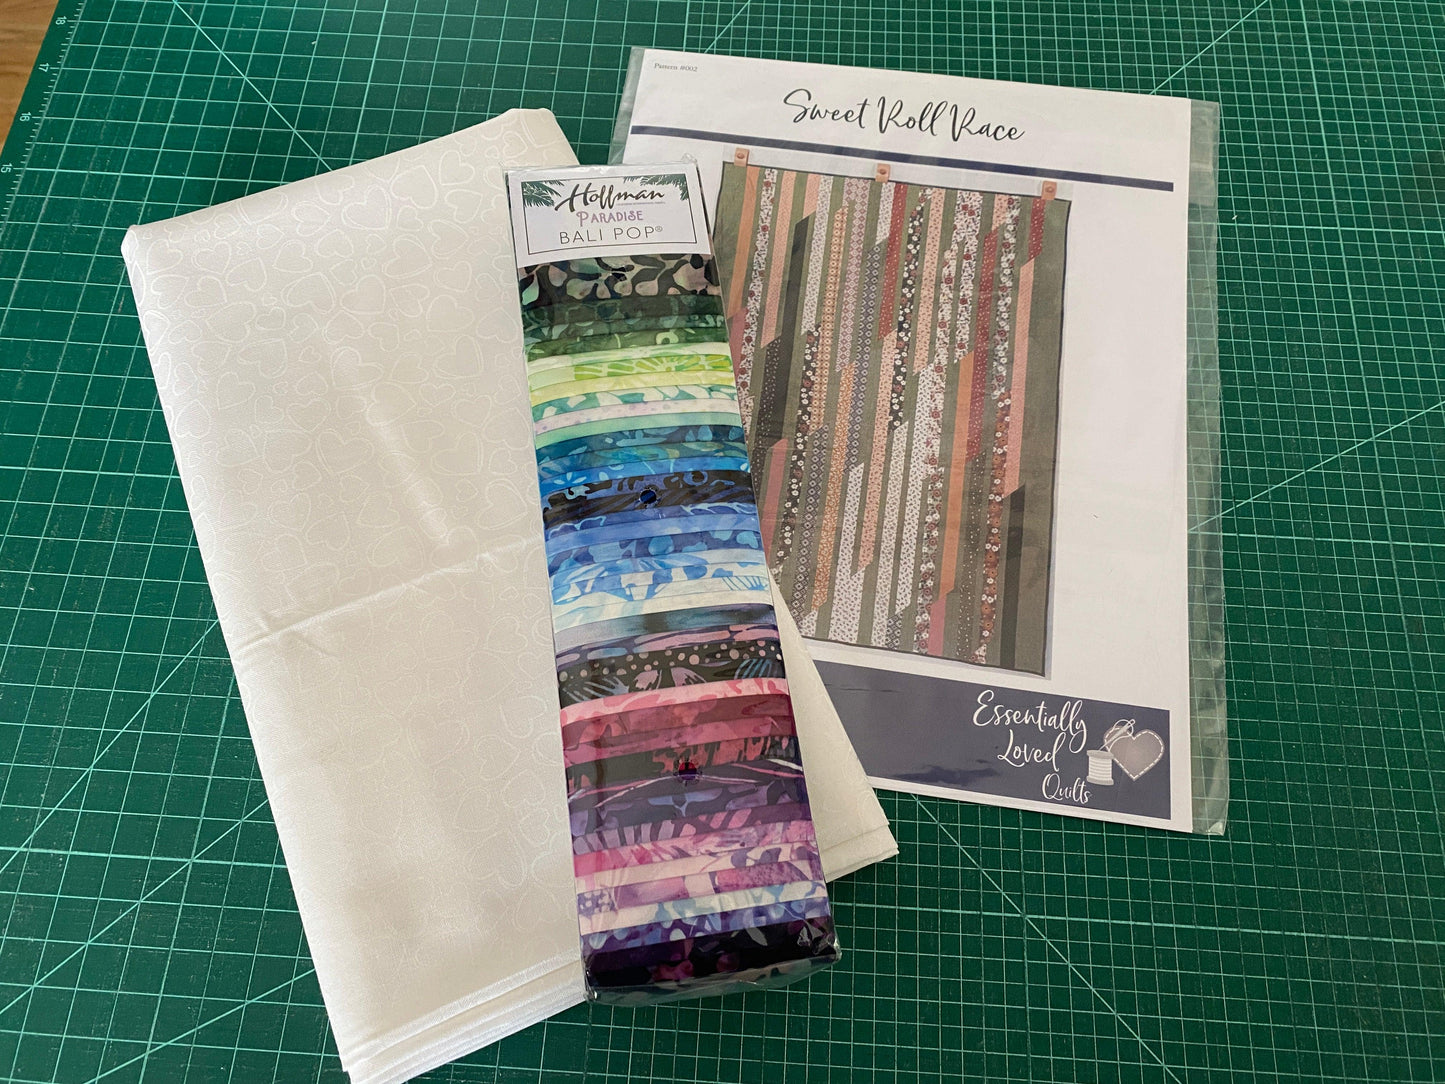 One of a Kind Kit for Sweet Roll Race Quilt - Essentially Loved Quilts